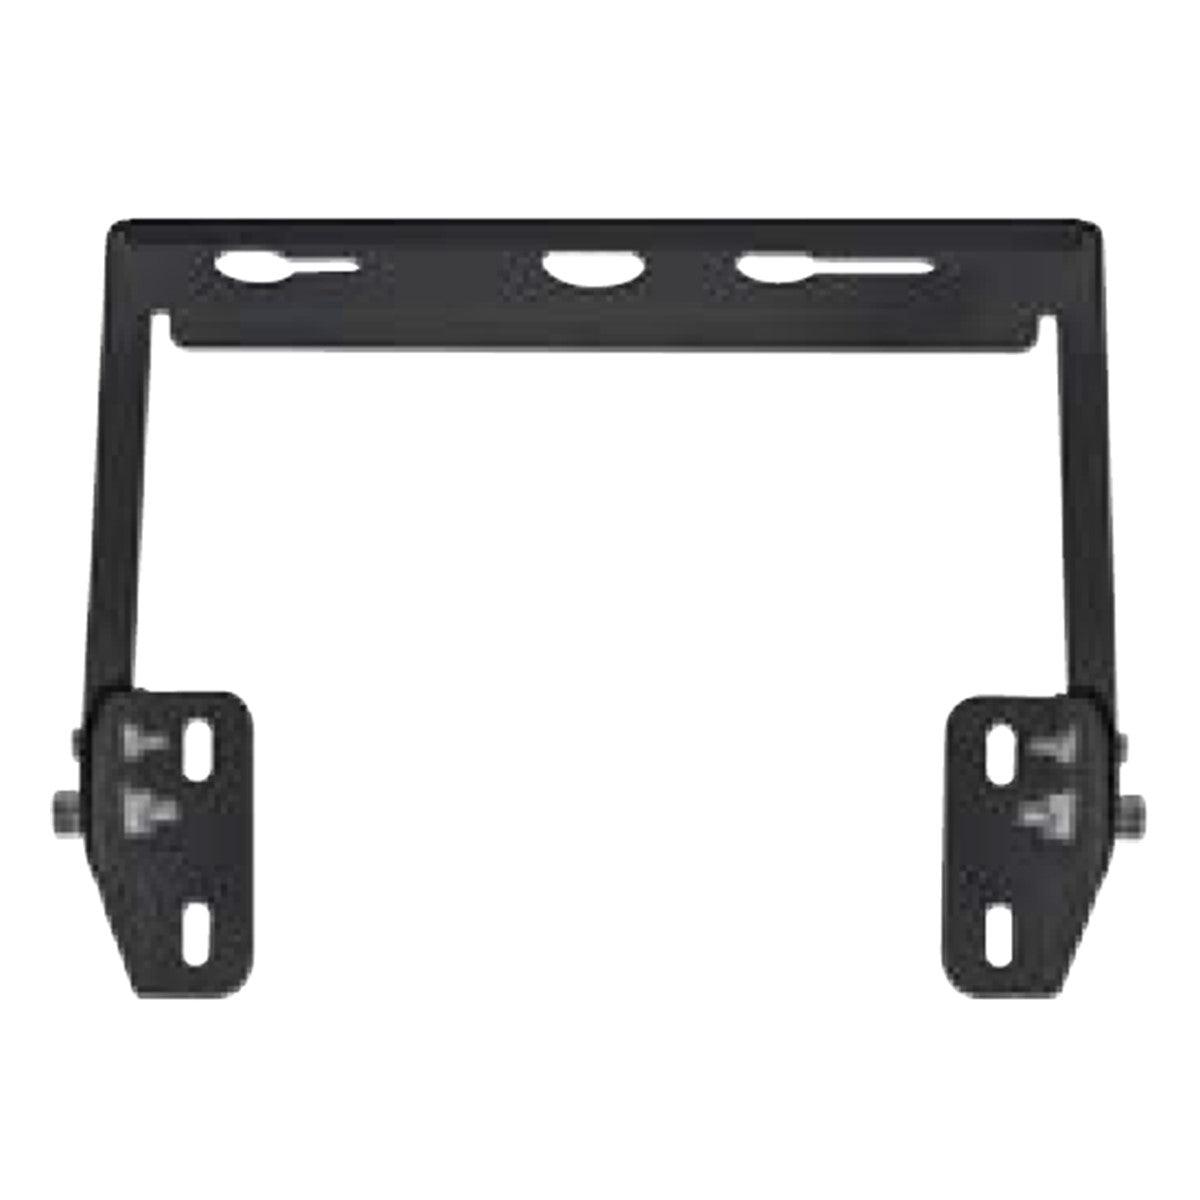 Sylvania UFO High Bay 3A Black Surface/Pendant Mount Bracket, For 100-150W Products - Bees Lighting